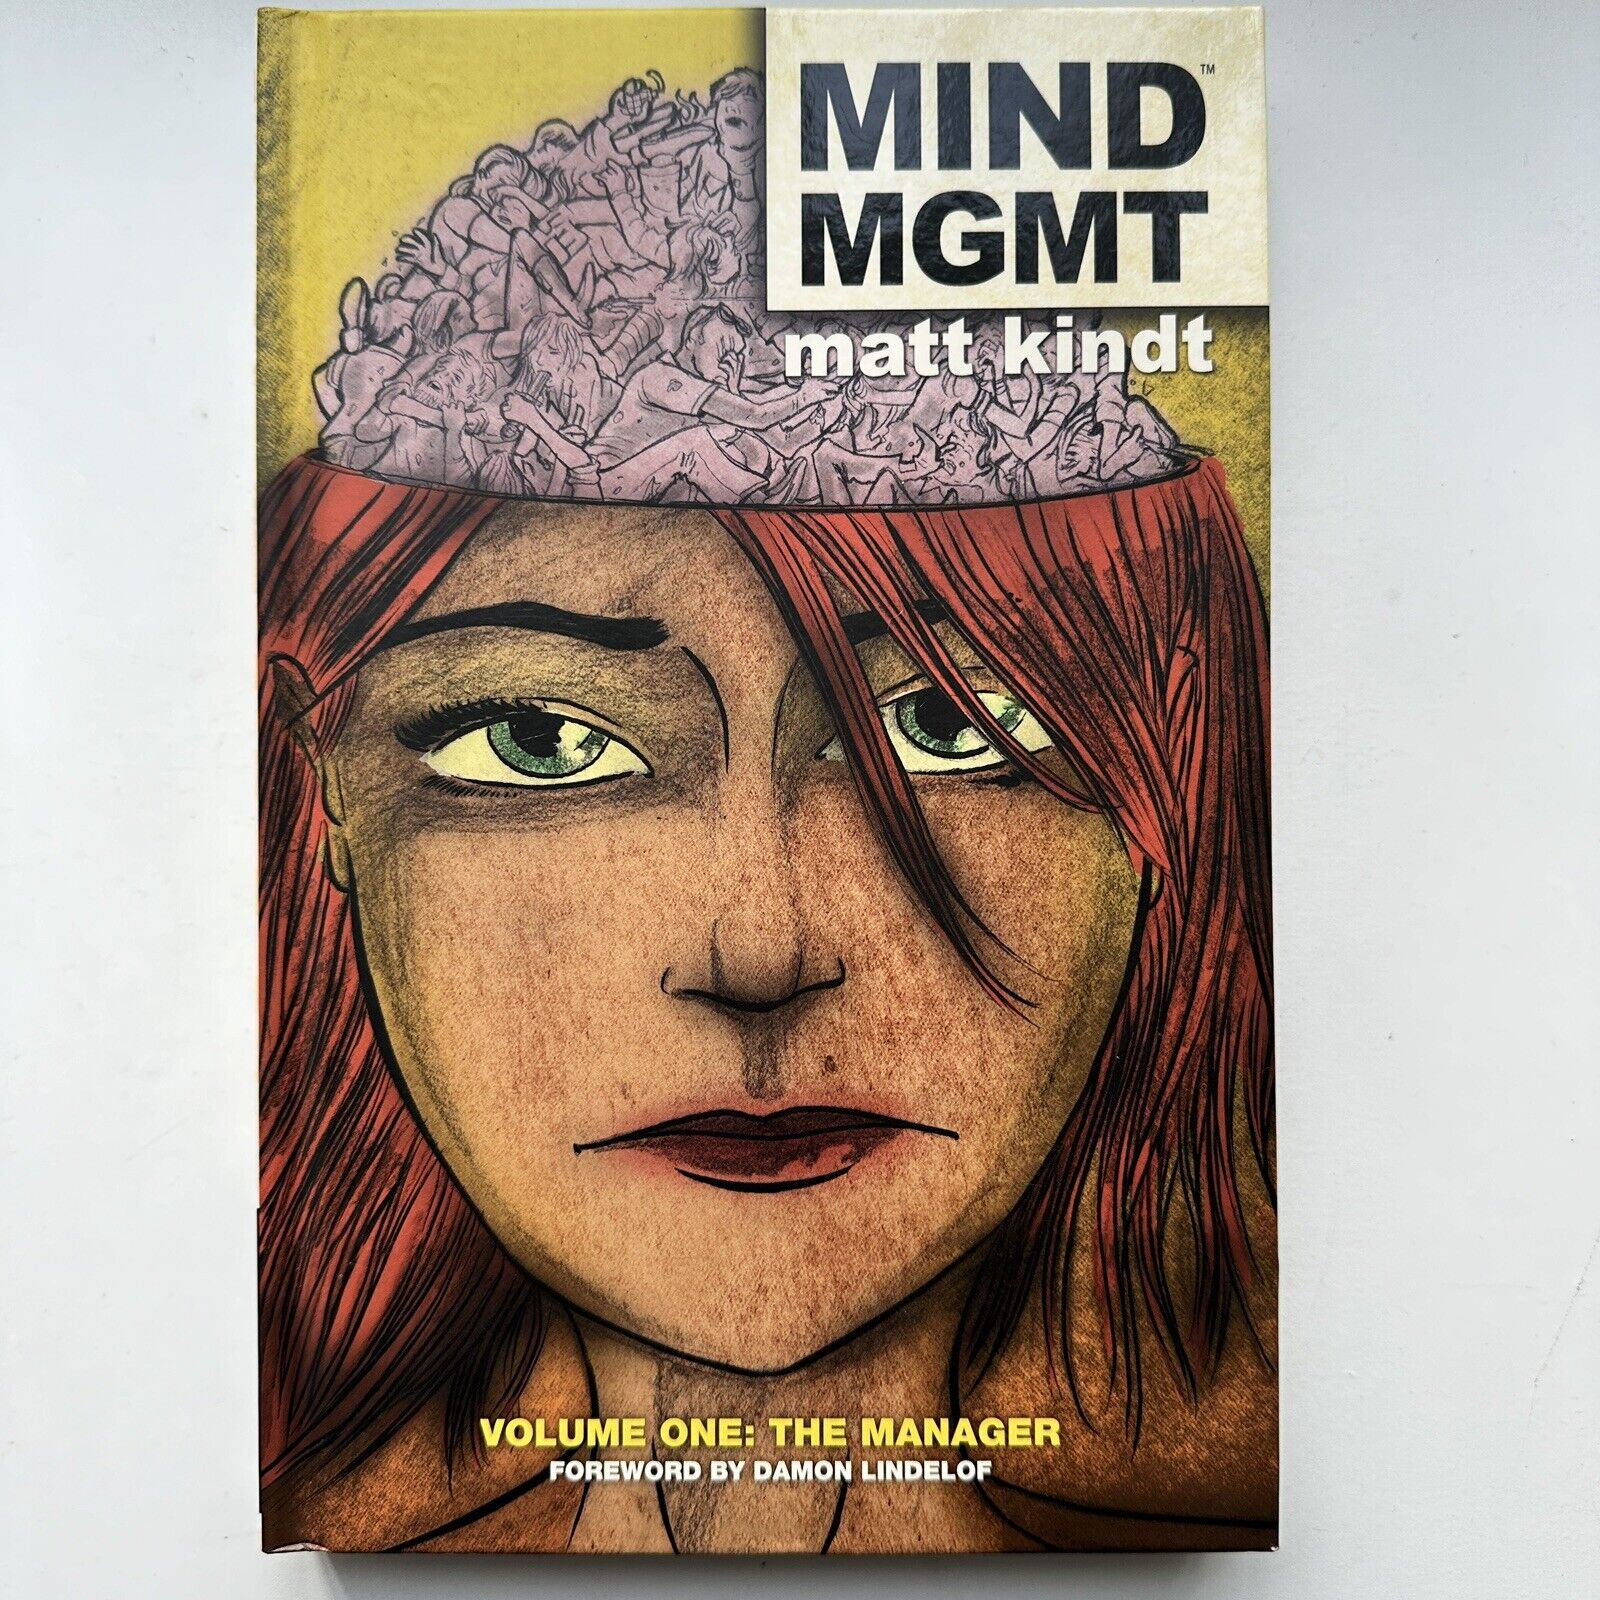 MIND MGMT Volume One: The Manager Hardcover Dark Horse Comics